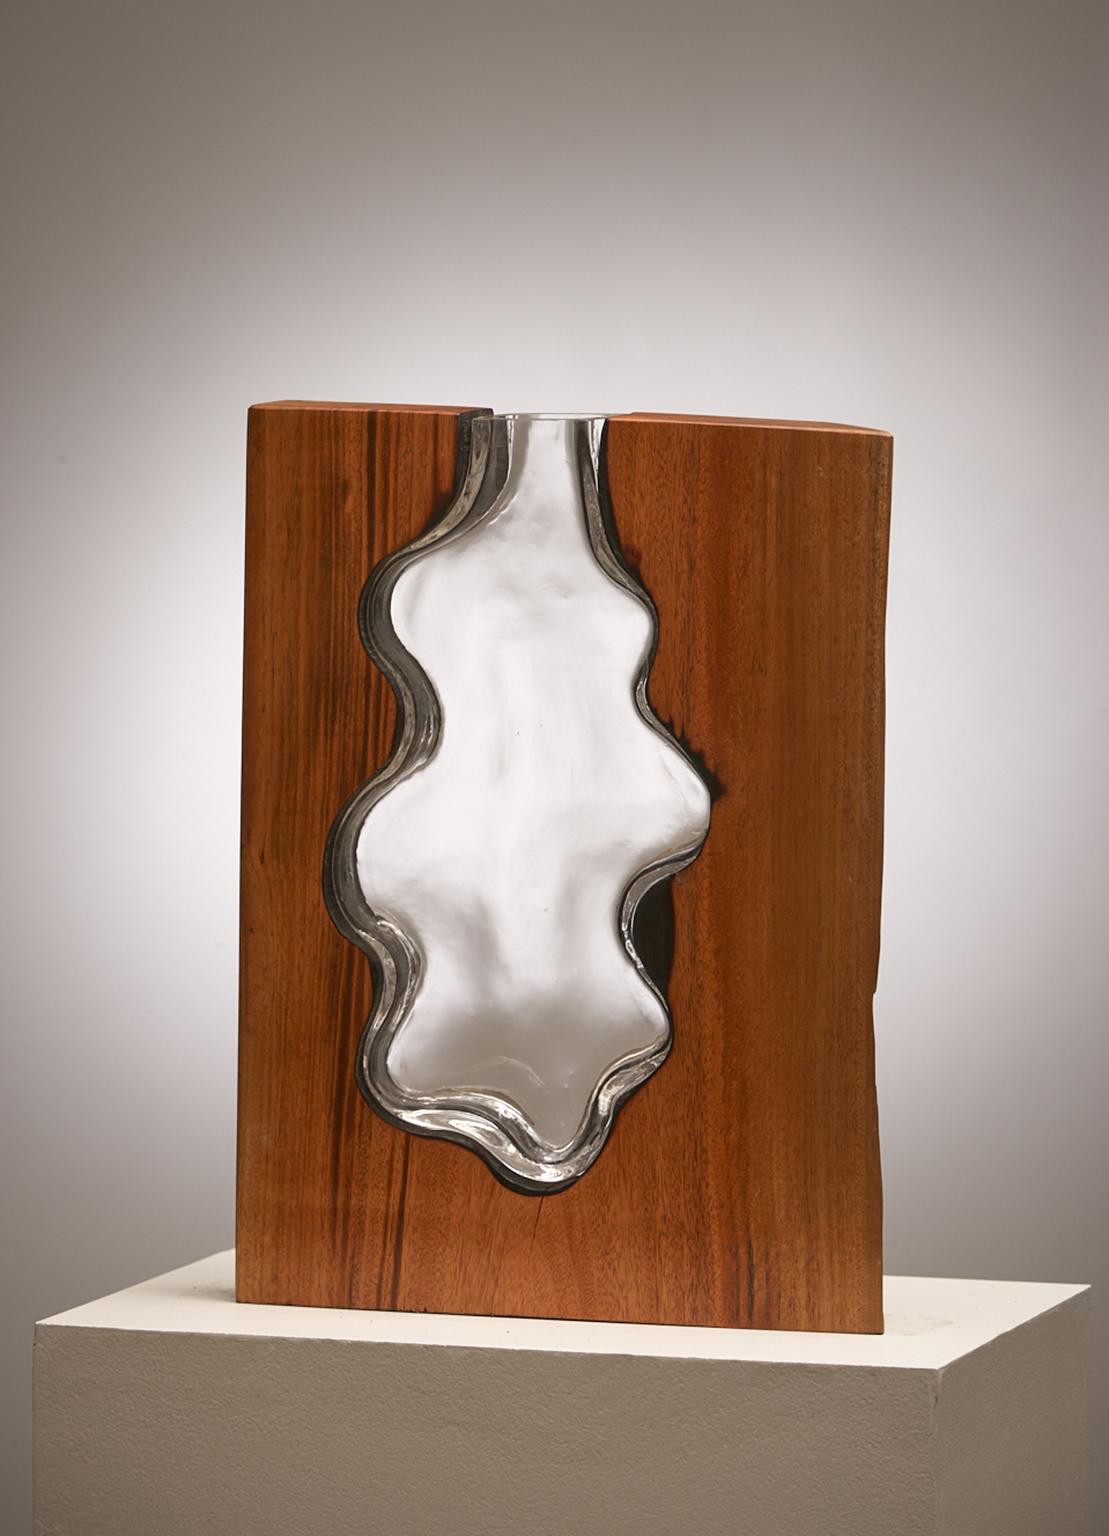 Scott Slagerman / Jim Fishman Abstract Sculpture - Hand Blown Clear Glass with Live Edge Wood  "Vase" Sculpture, Scott Slagerman